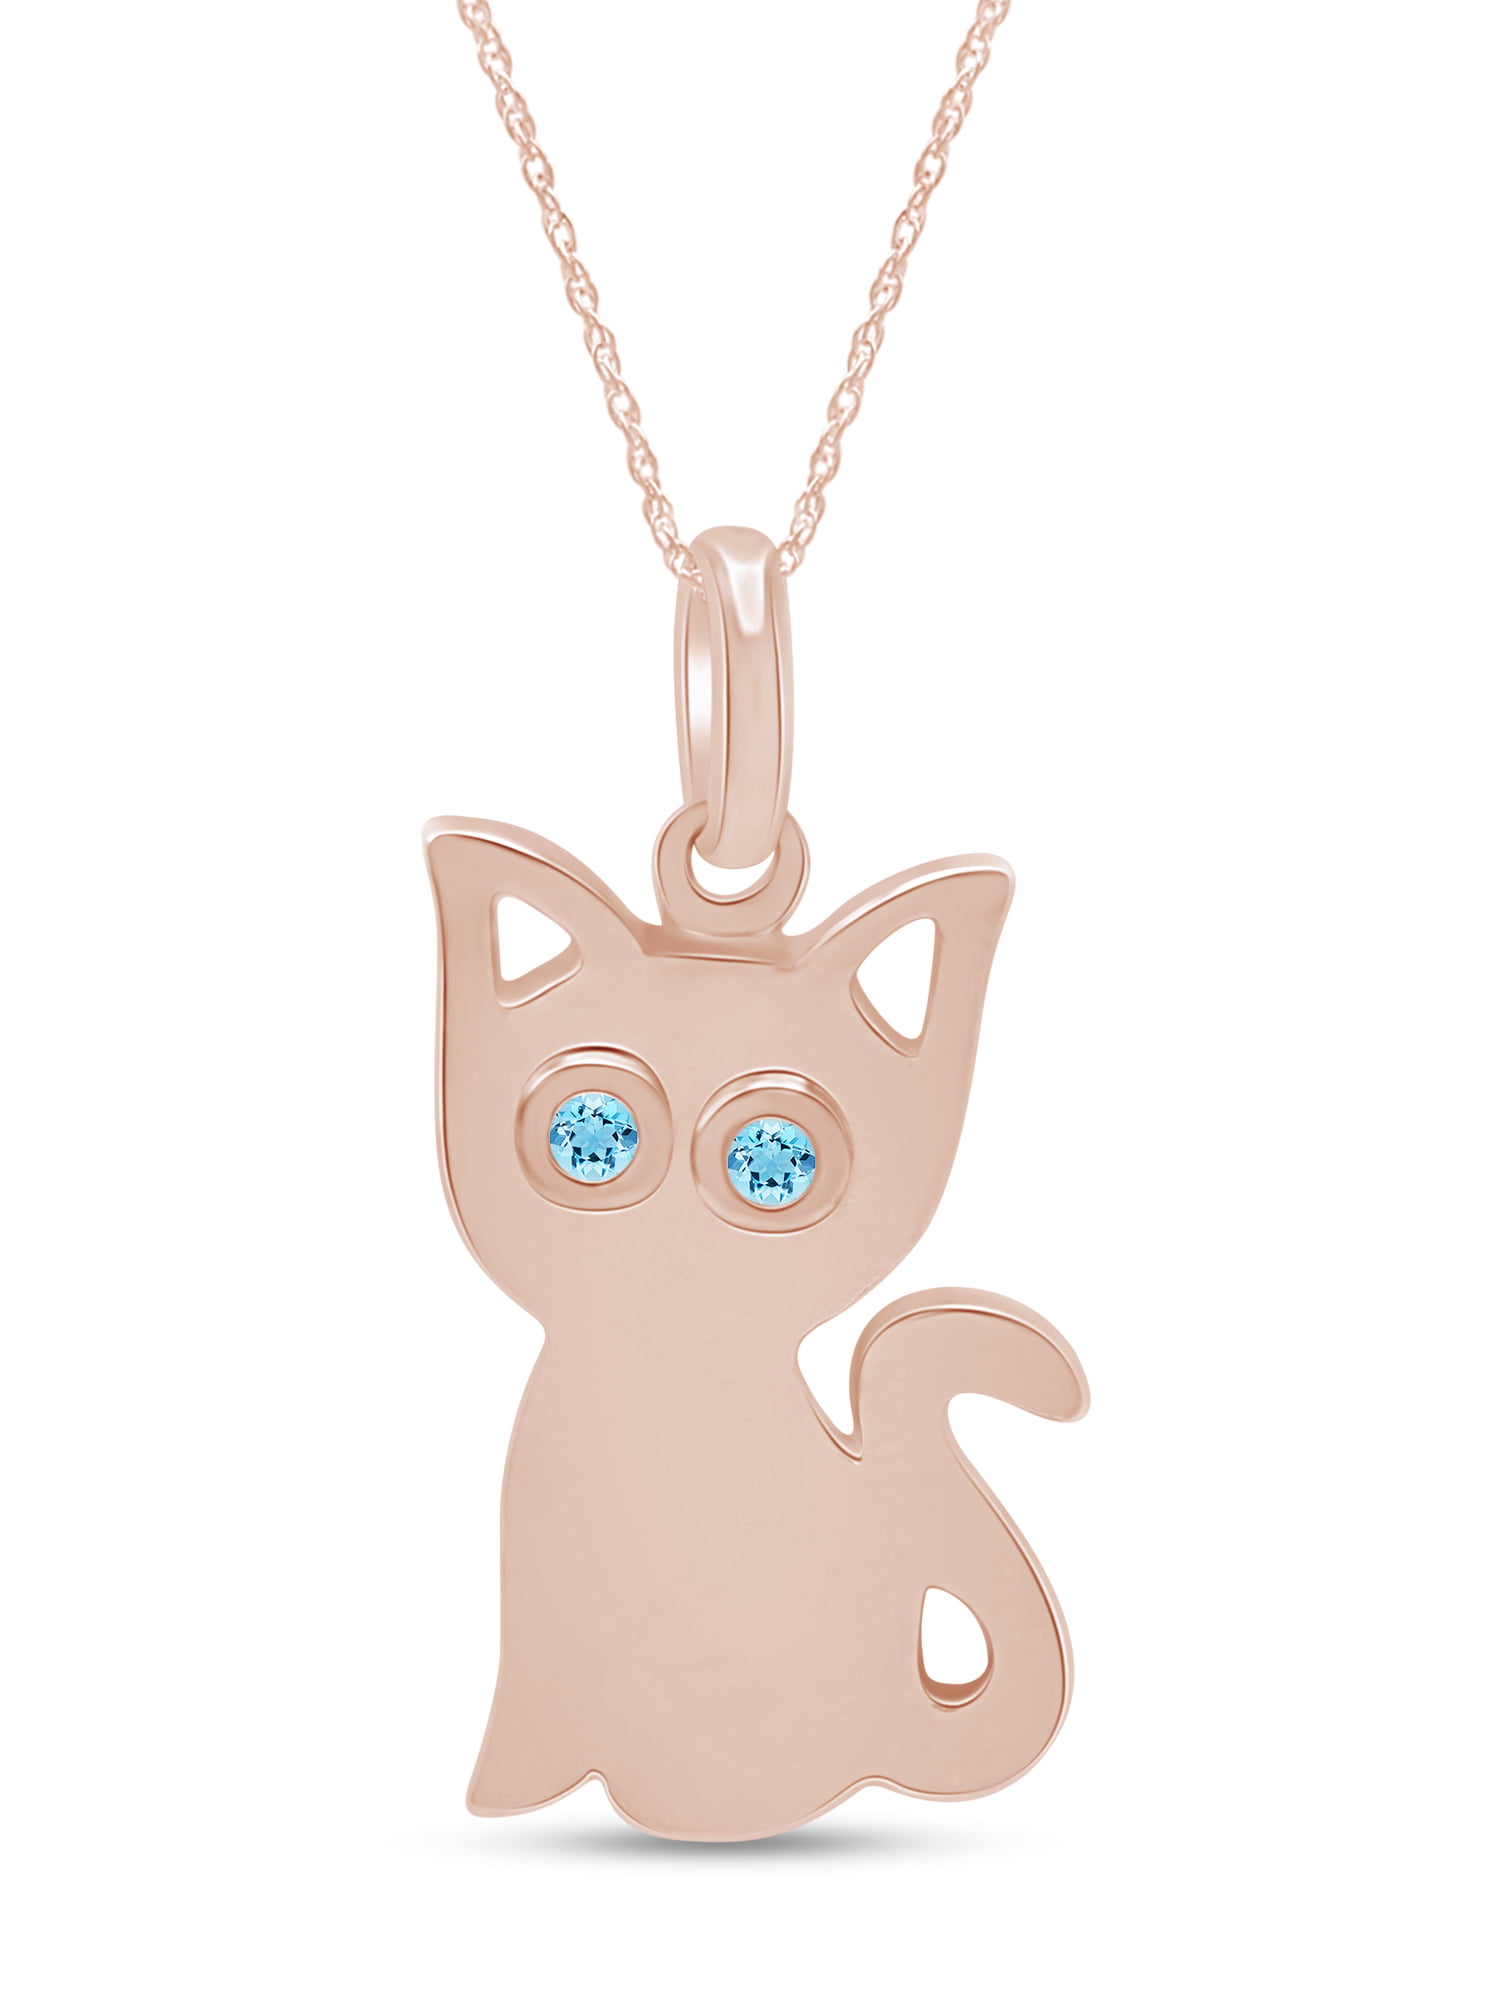 Wishrocks 14K Gold Over Sterling Silver Cat Kitty Mom & Daughter Pendant Necklace